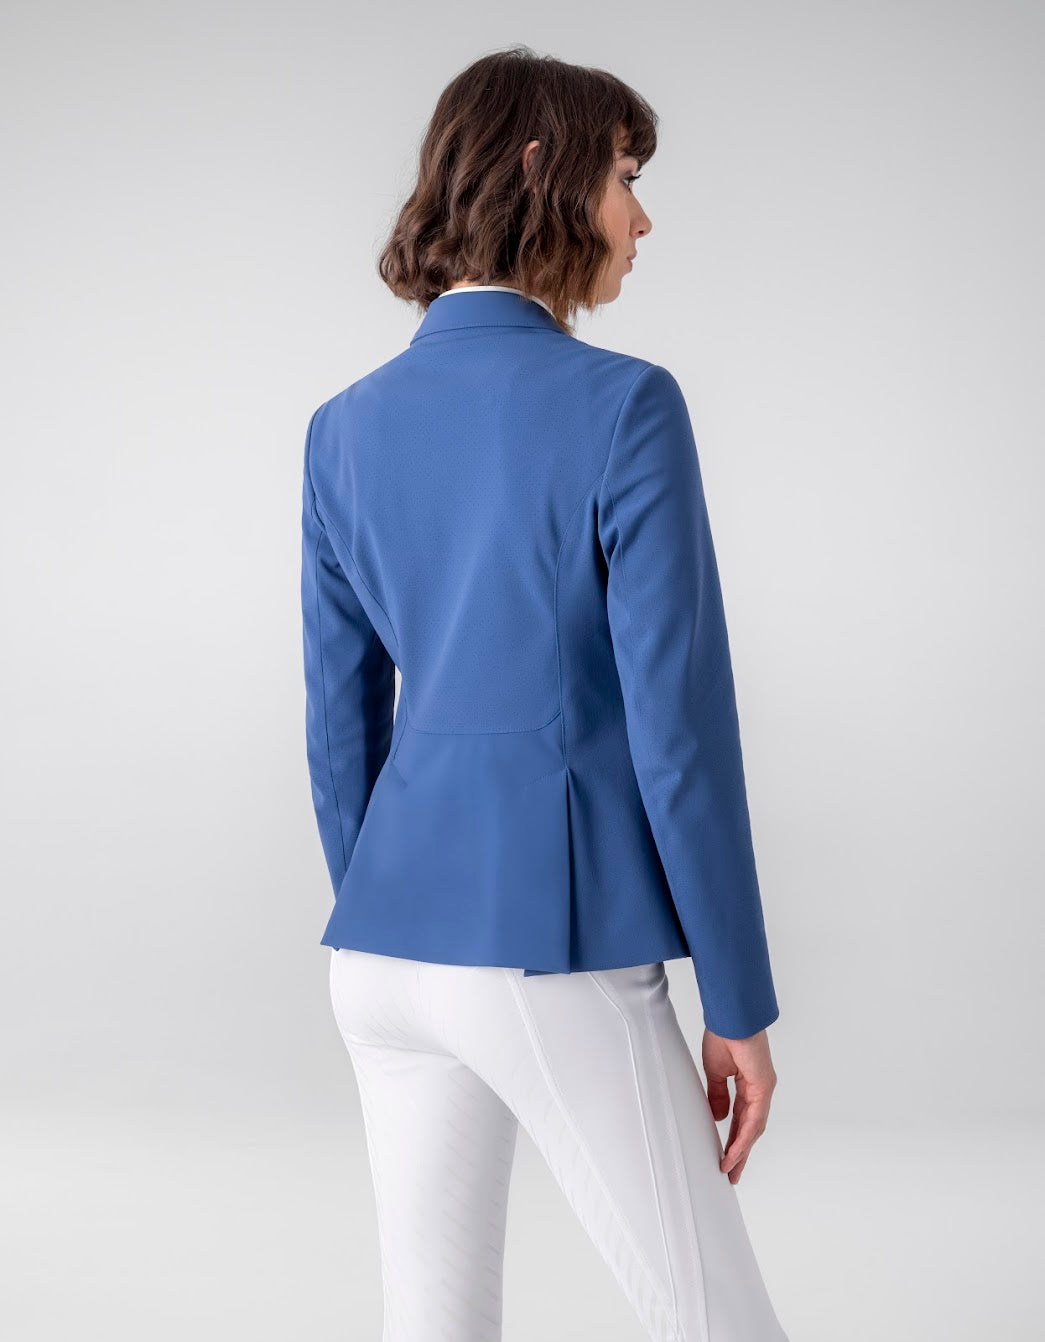 Equiline Blue Perforated Casur Competition Jacket